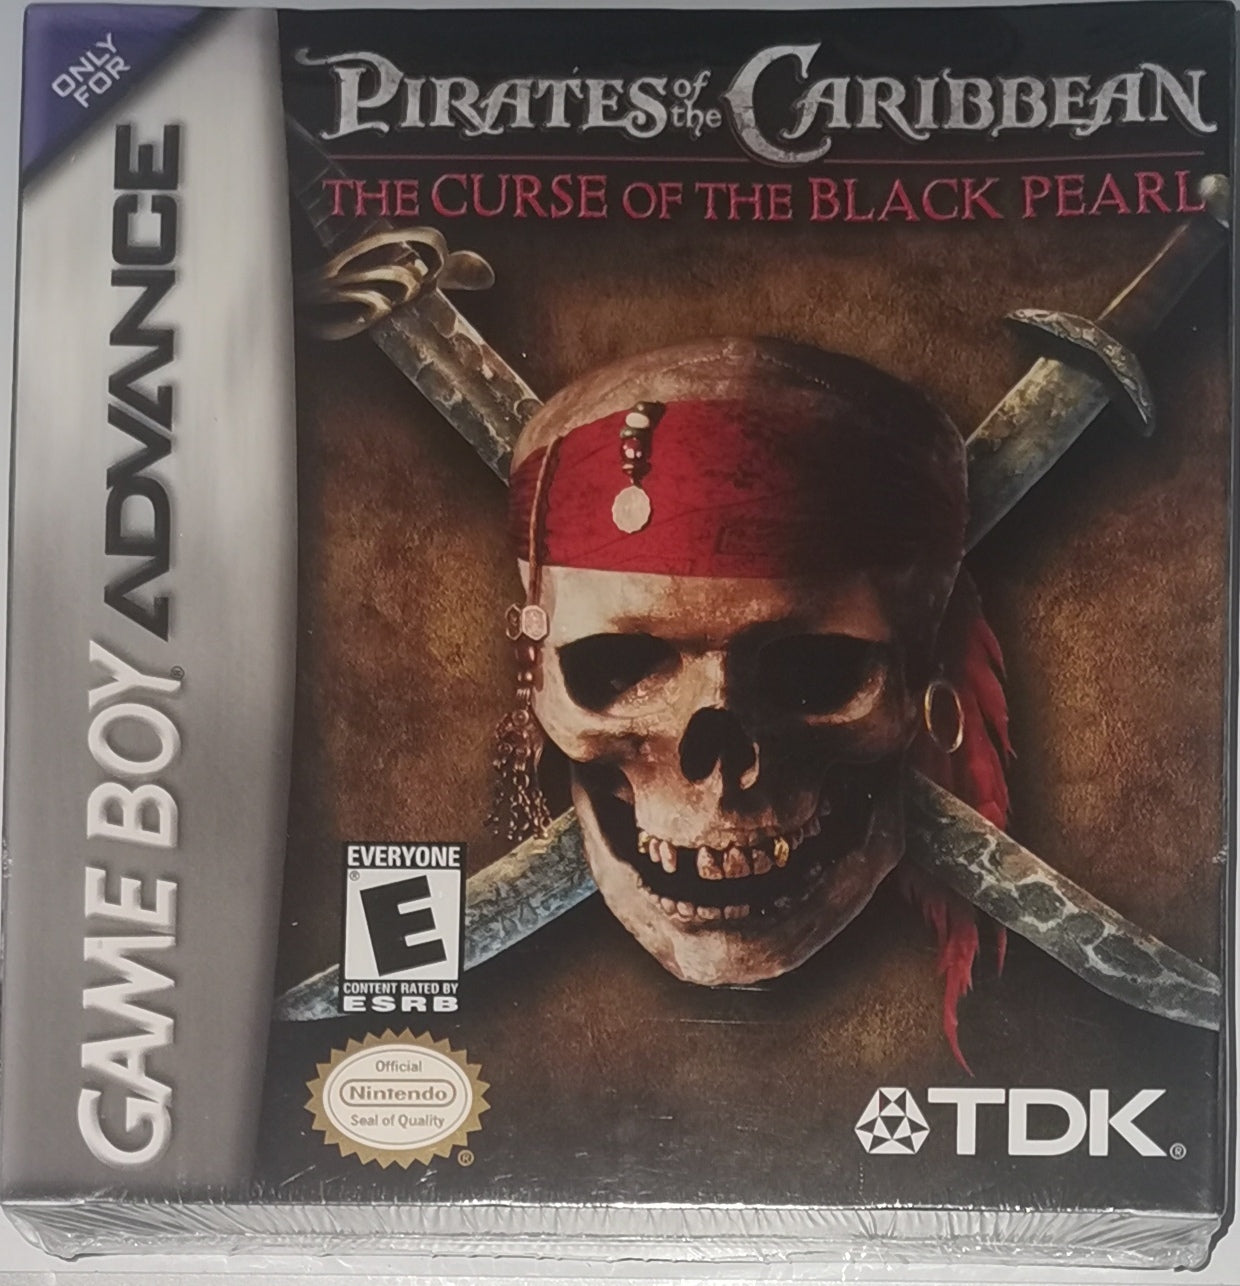 Pirates of the Caribbean the curse of the black pearl Game Boy Advance US [Neu]